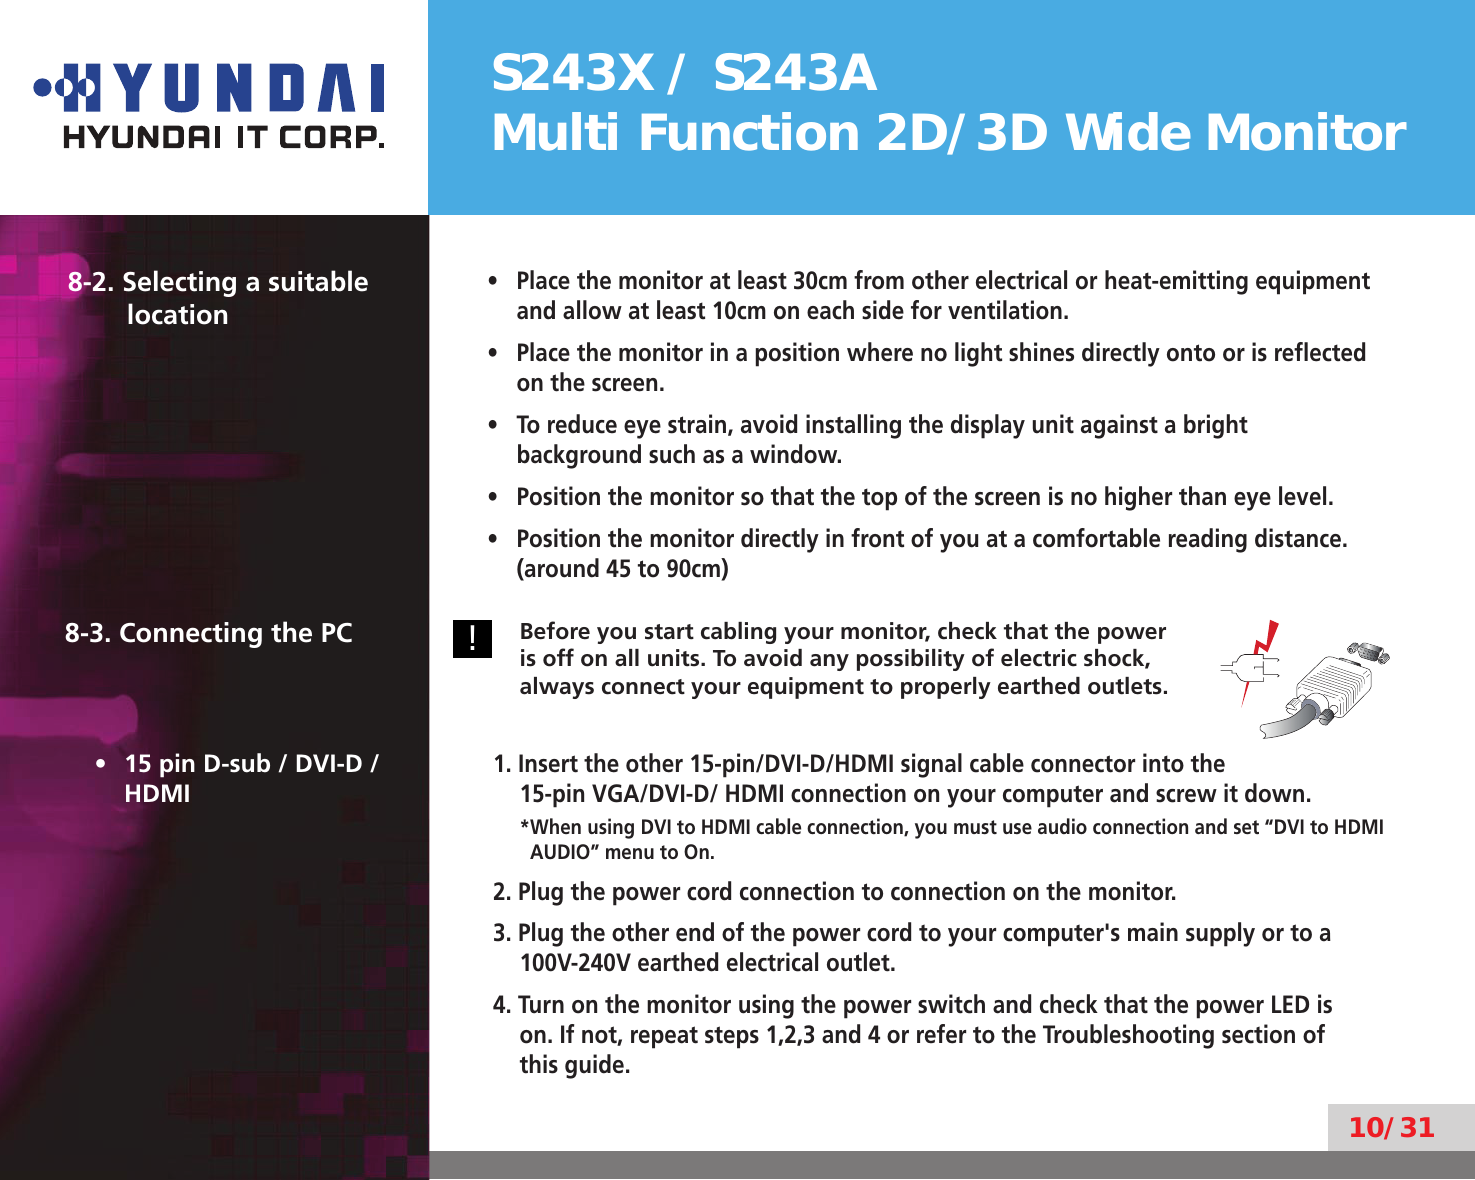 S243X / S243AMulti Function 2D/3D Wide Monitor10/318-2. Selecting a suitable  locationPlace the monitor at least 30cm from other electrical or heat-emitting equipment • and allow at least 10cm on each side for ventilation.Place the monitor in a position where no light shines directly onto or is reﬂected • on the screen.To reduce eye strain, avoid installing the display unit against a bright • background such as a window.Position the monitor so that the top of the screen is no higher than eye level.• Position the monitor directly in front of you at a comfortable reading distance. • (around 45 to 90cm)8-3. Connecting the PC!Before you start cabling your monitor, check that the power is off on all units. To avoid any possibility of electric shock, always connect your equipment to properly earthed outlets.15 pin D-sub / DVI-D / • HDMI1. Insert the other 15-pin/DVI-D/HDMI signal cable connector into the  15-pin VGA/DVI-D/ HDMI connection on your computer and screw it down.* When using DVI to HDMI cable connection, you must use audio connection and set “DVI to HDMI AUDIO” menu to On.2. Plug the power cord connection to connection on the monitor.3. Plug the other end of the power cord to your computer&apos;s main supply or to a 100V-240V earthed electrical outlet.4. Turn on the monitor using the power switch and check that the power LED is on. If not, repeat steps 1,2,3 and 4 or refer to the Troubleshooting section of this guide.